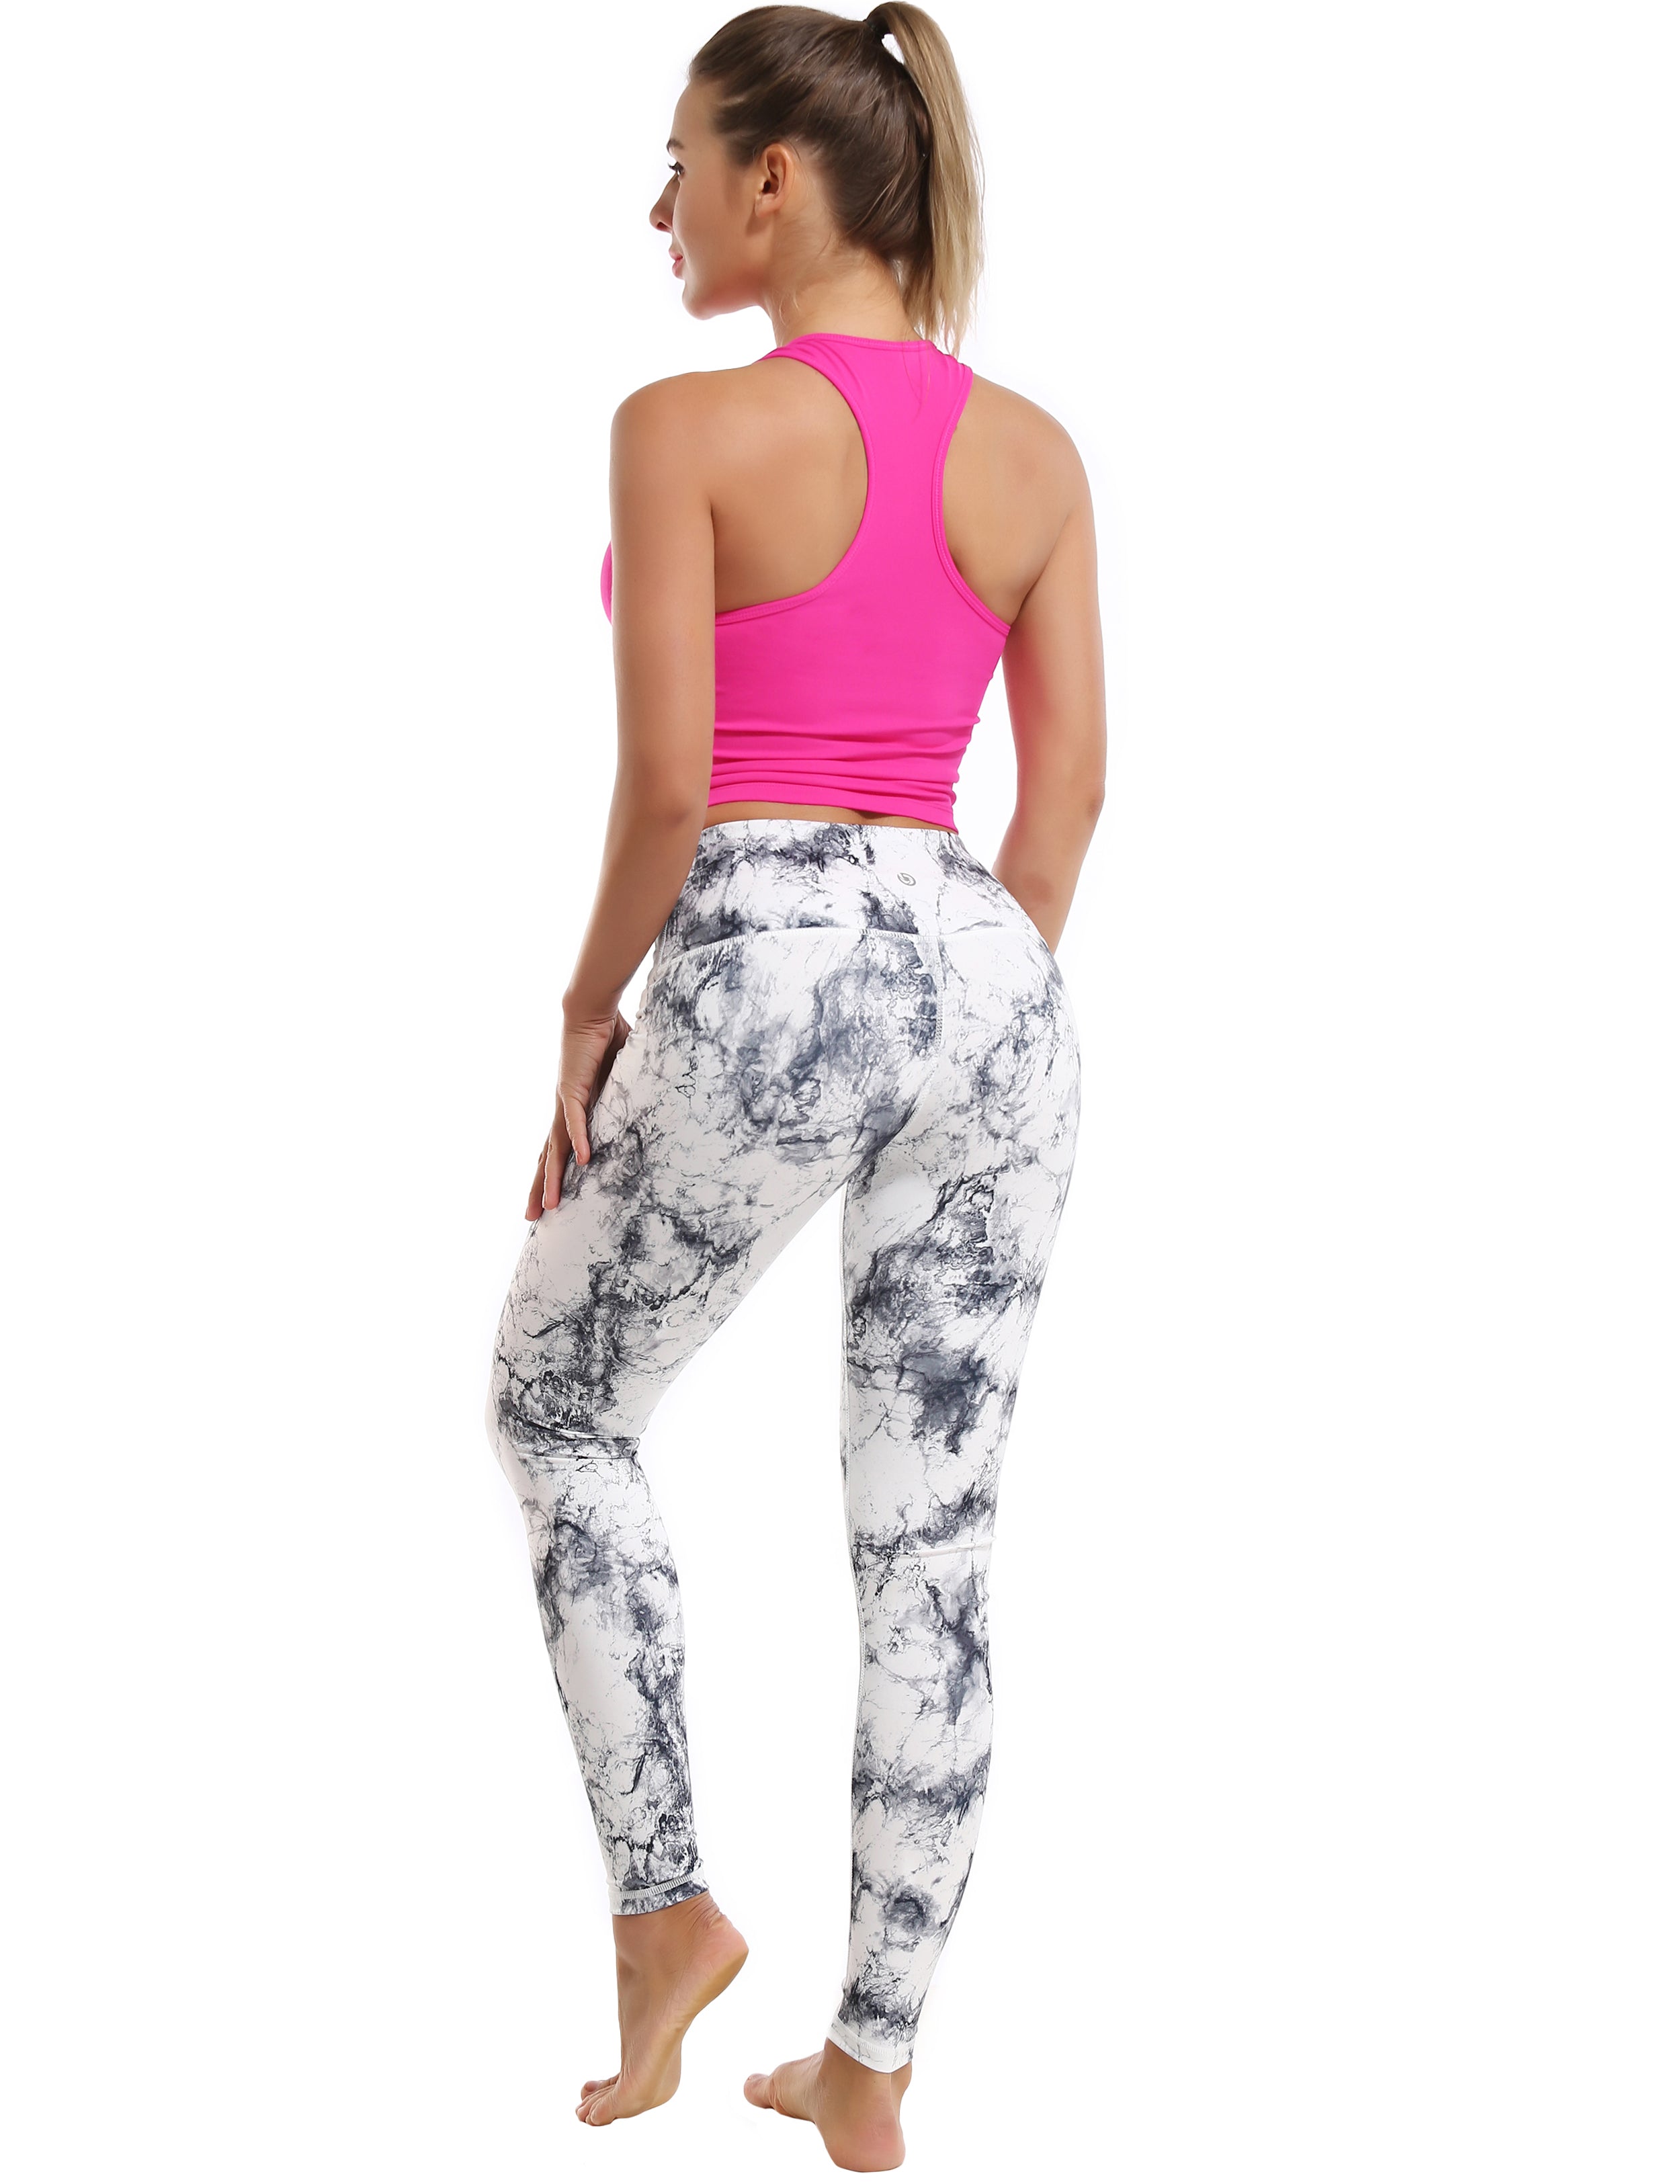 High Waist yogastudio Pants arabescato 82%Polyester/18%Spandex Fabric doesn't attract lint easily 4-way stretch No see-through Moisture-wicking Tummy control Inner pocket